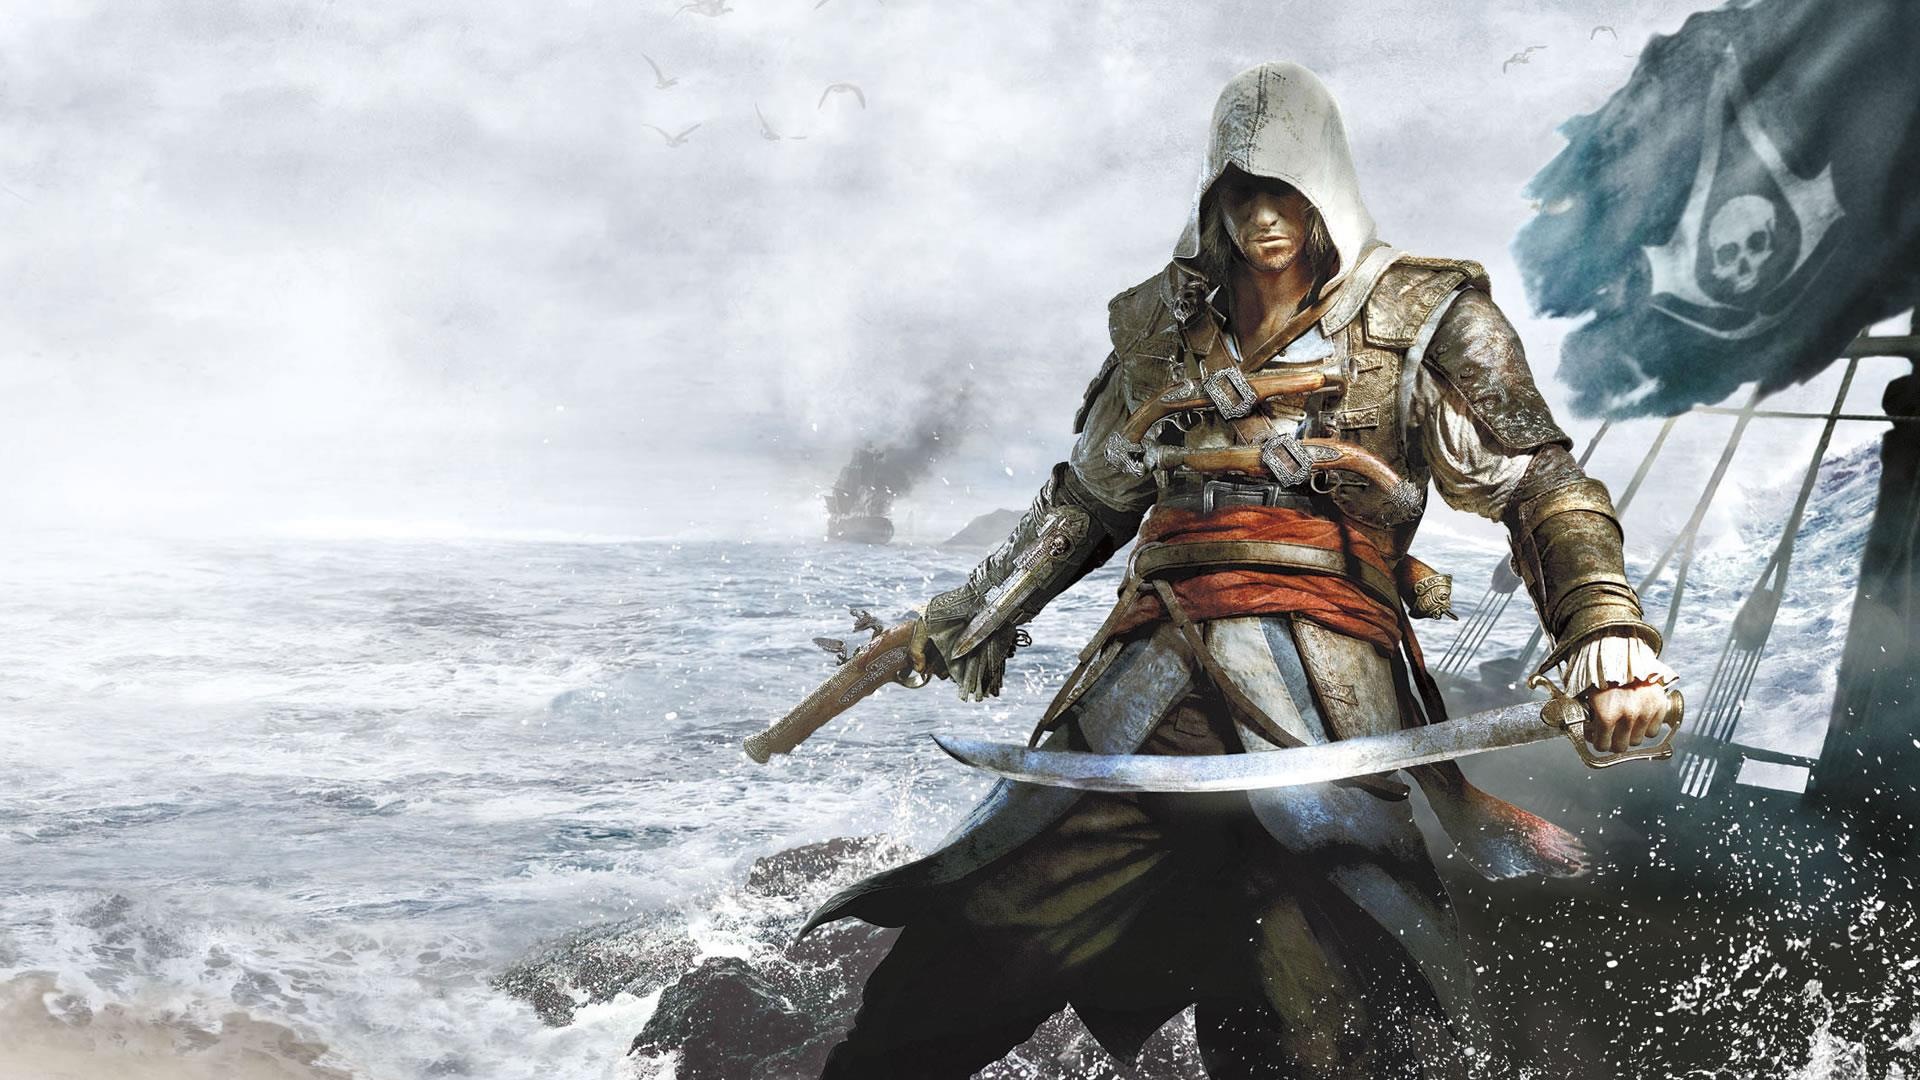 Creed IV Assassin: Black Flag HD wallpapers #7 - 1920x1080